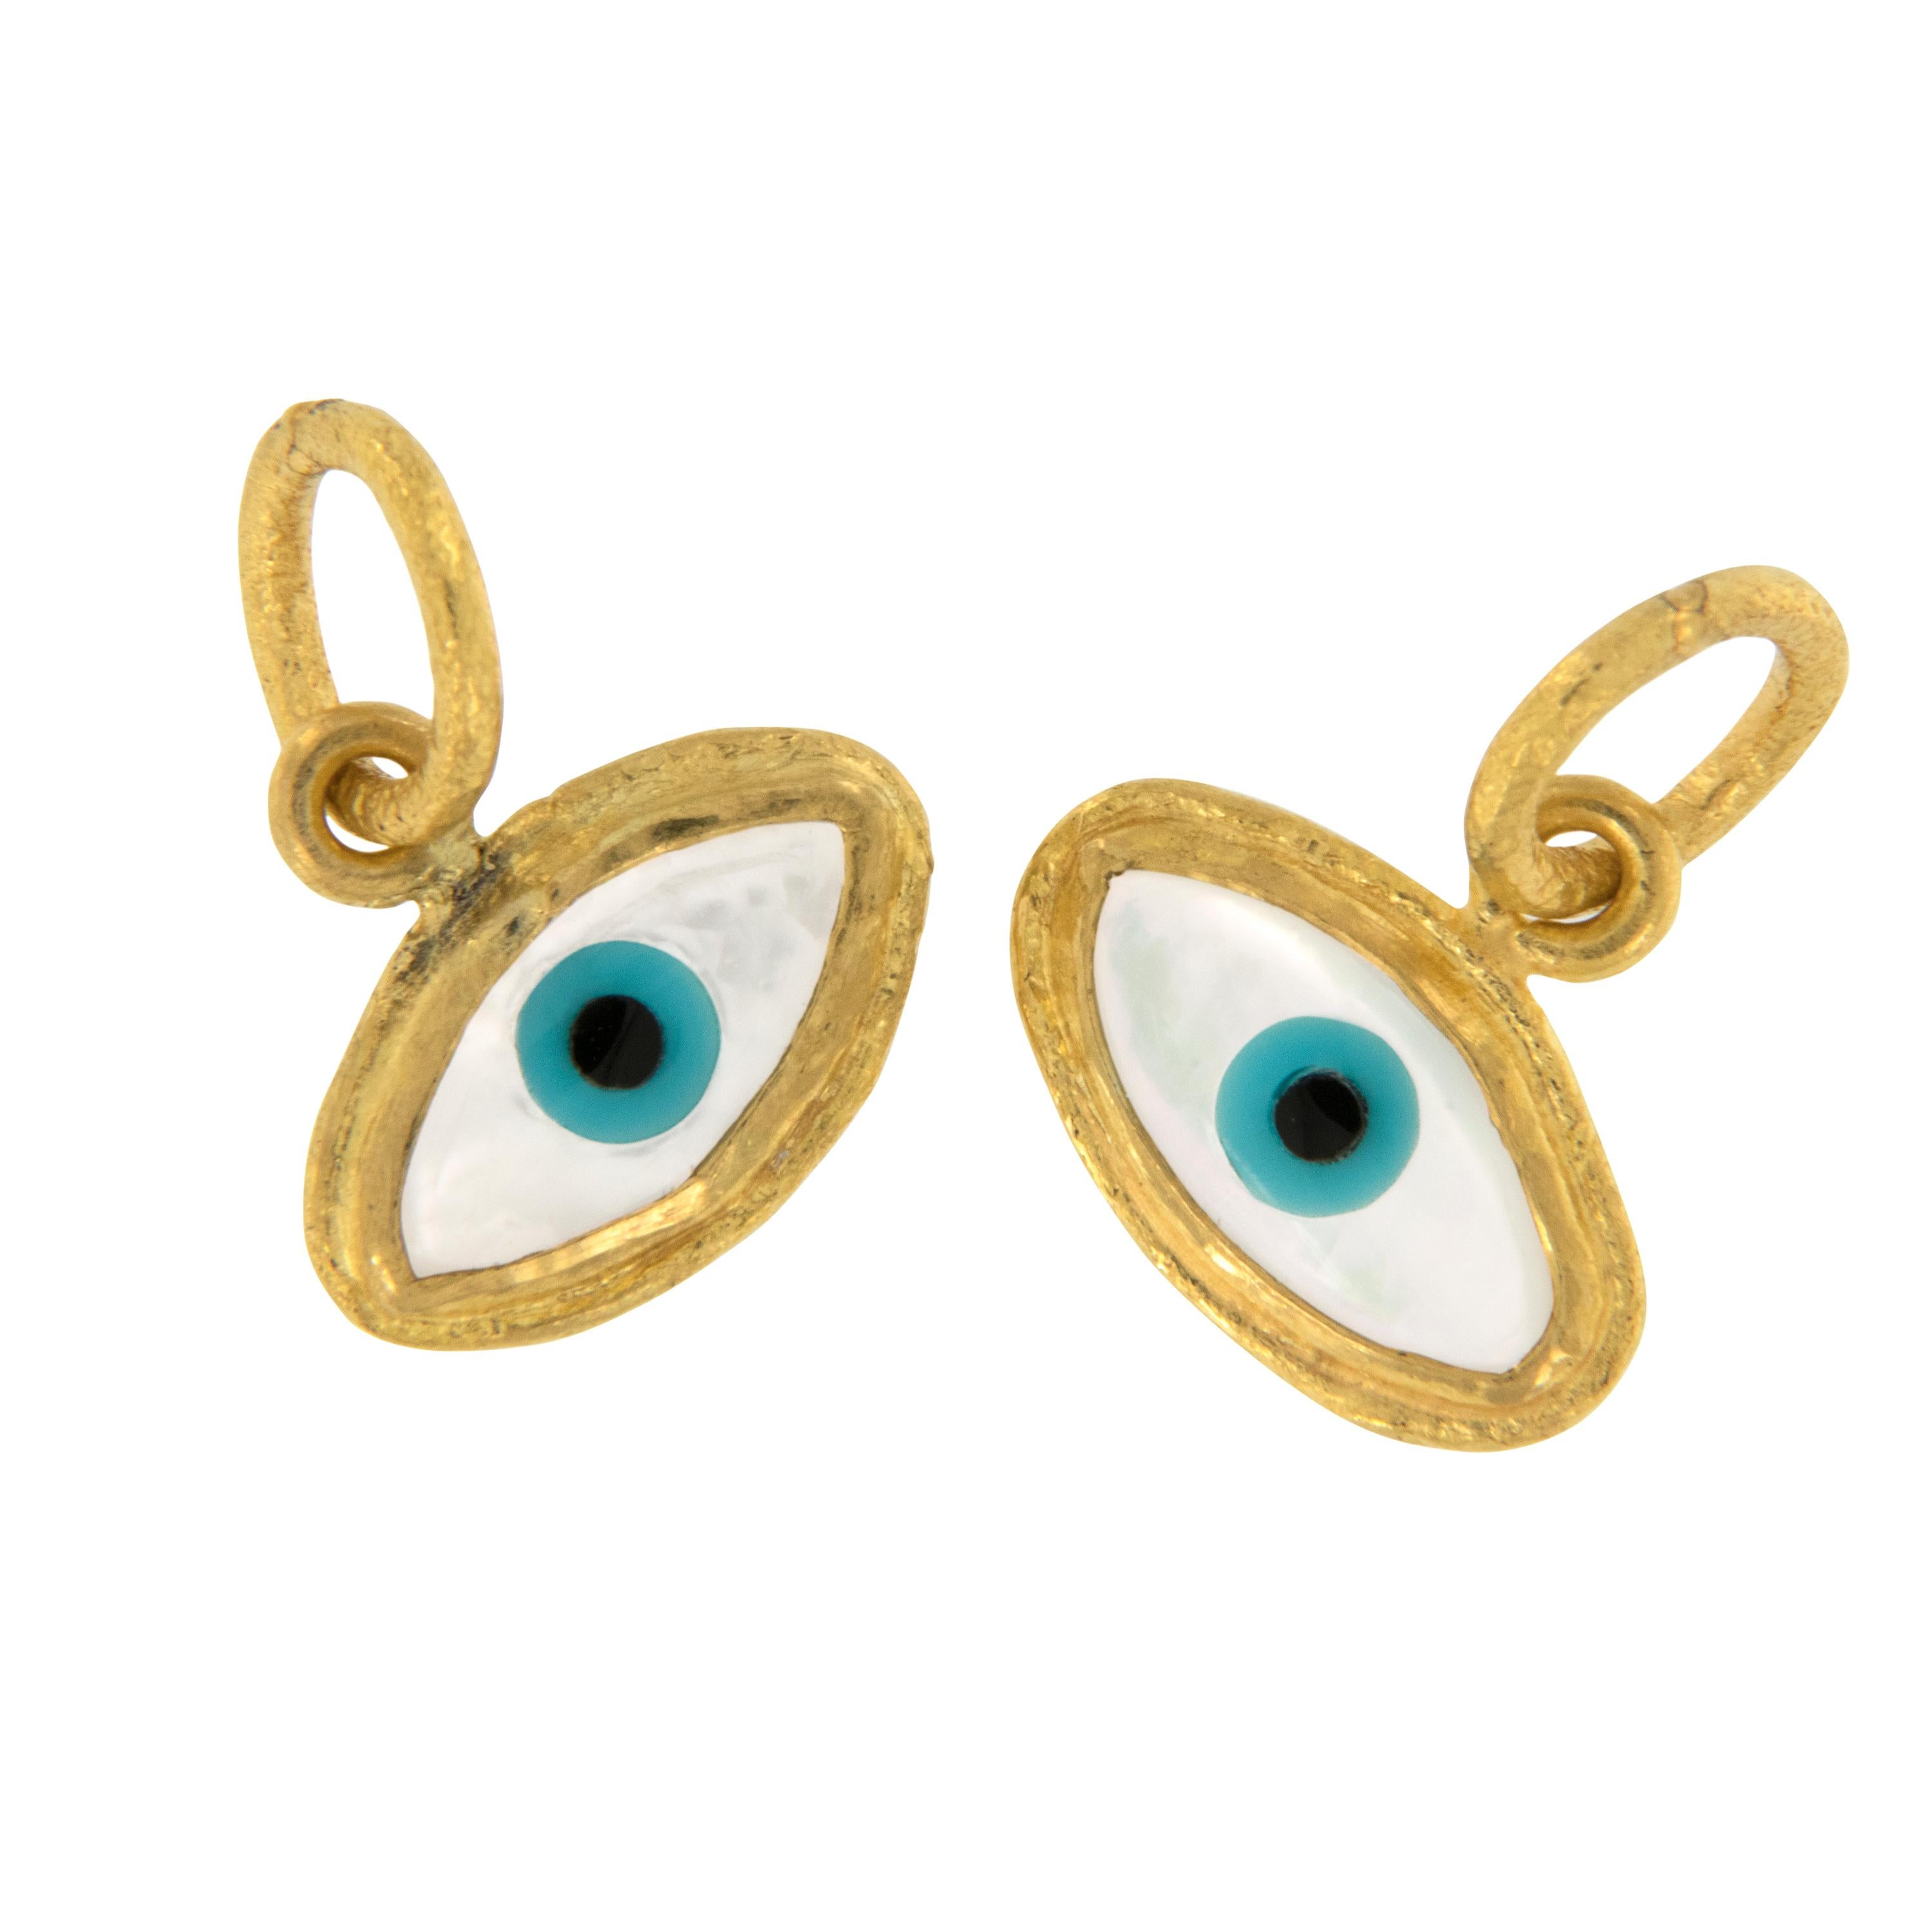 Rarest of all the golds, 24 karat gold is valued by all discerning investors. With it's unmistakable warm yellow color & hammered finish, this evil eye pendant / charm talisman is thought to keep you safe from curses. Light Blue: Color of the sky –